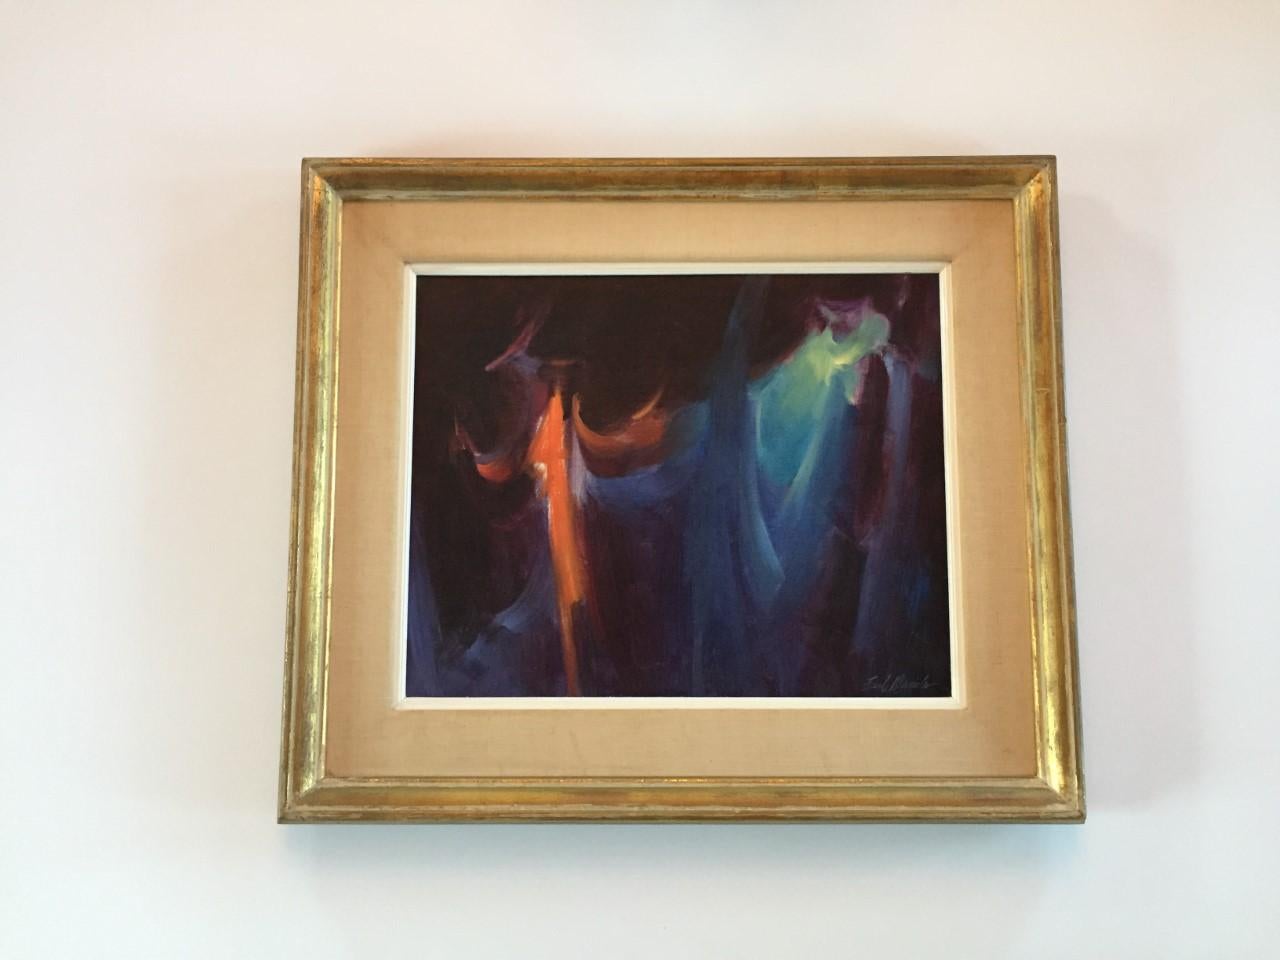 Mid-Century Modern Painting “Motion” by Earl Daniels 'Midcentury 1960s' American Painter For Sale